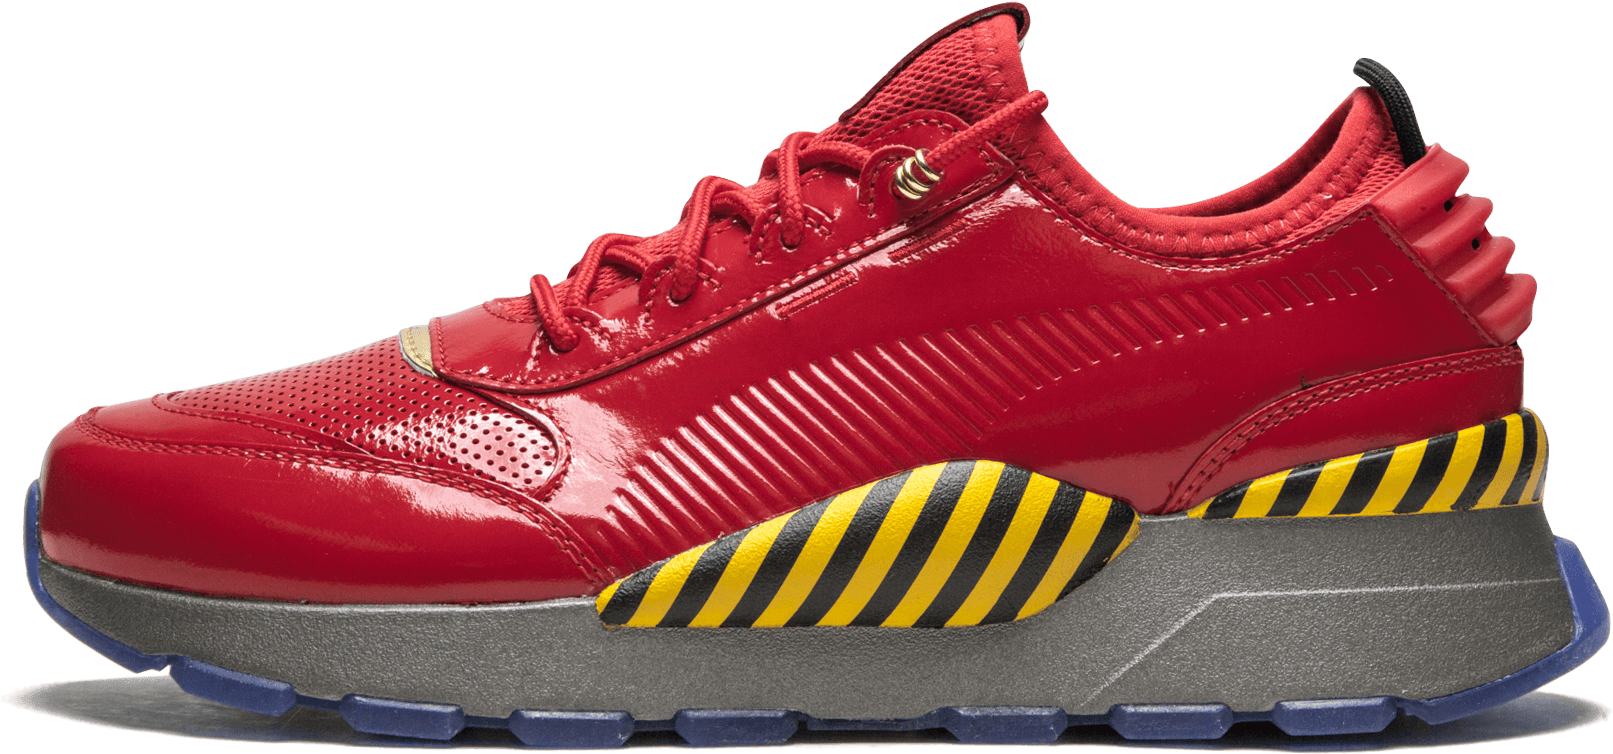 Red Puma Sneakerwith Yellow Stripes